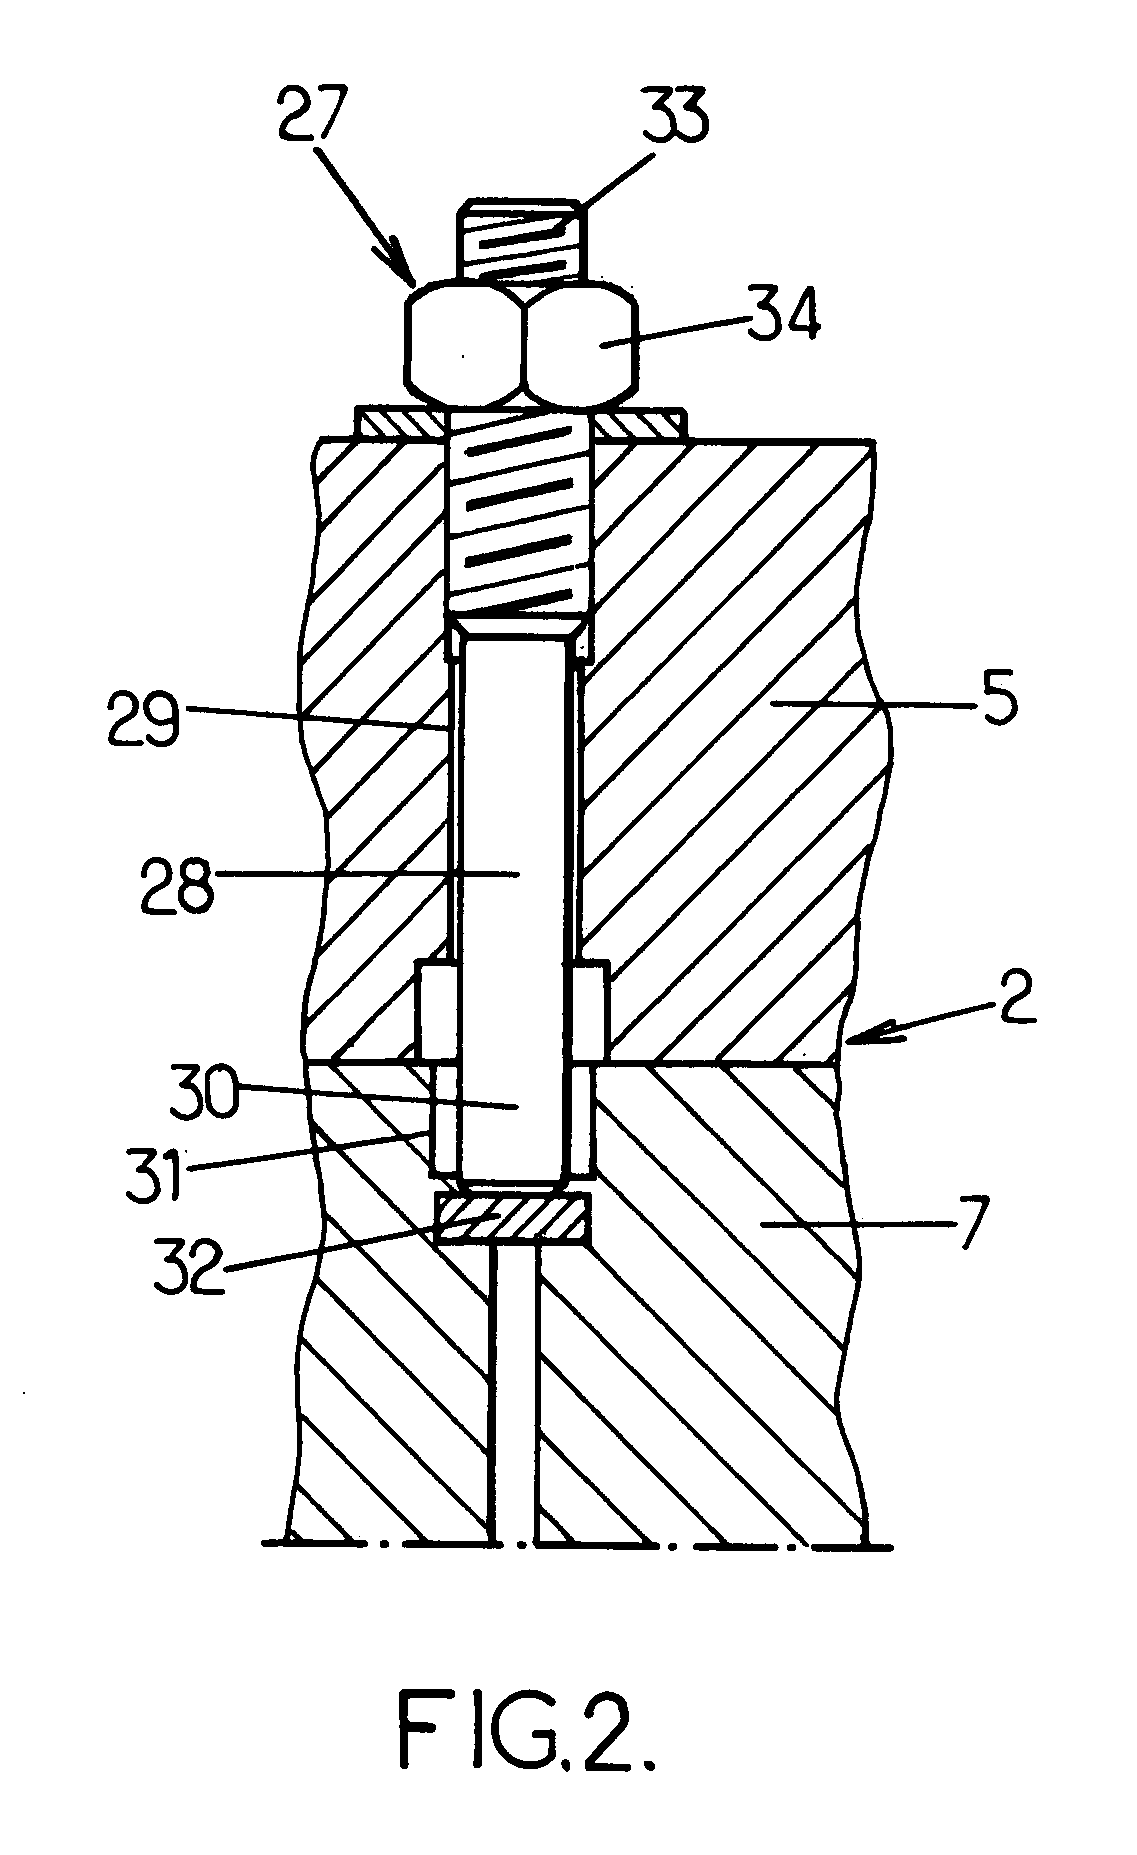 Moulding device for the manufacture of thermoplastic containers